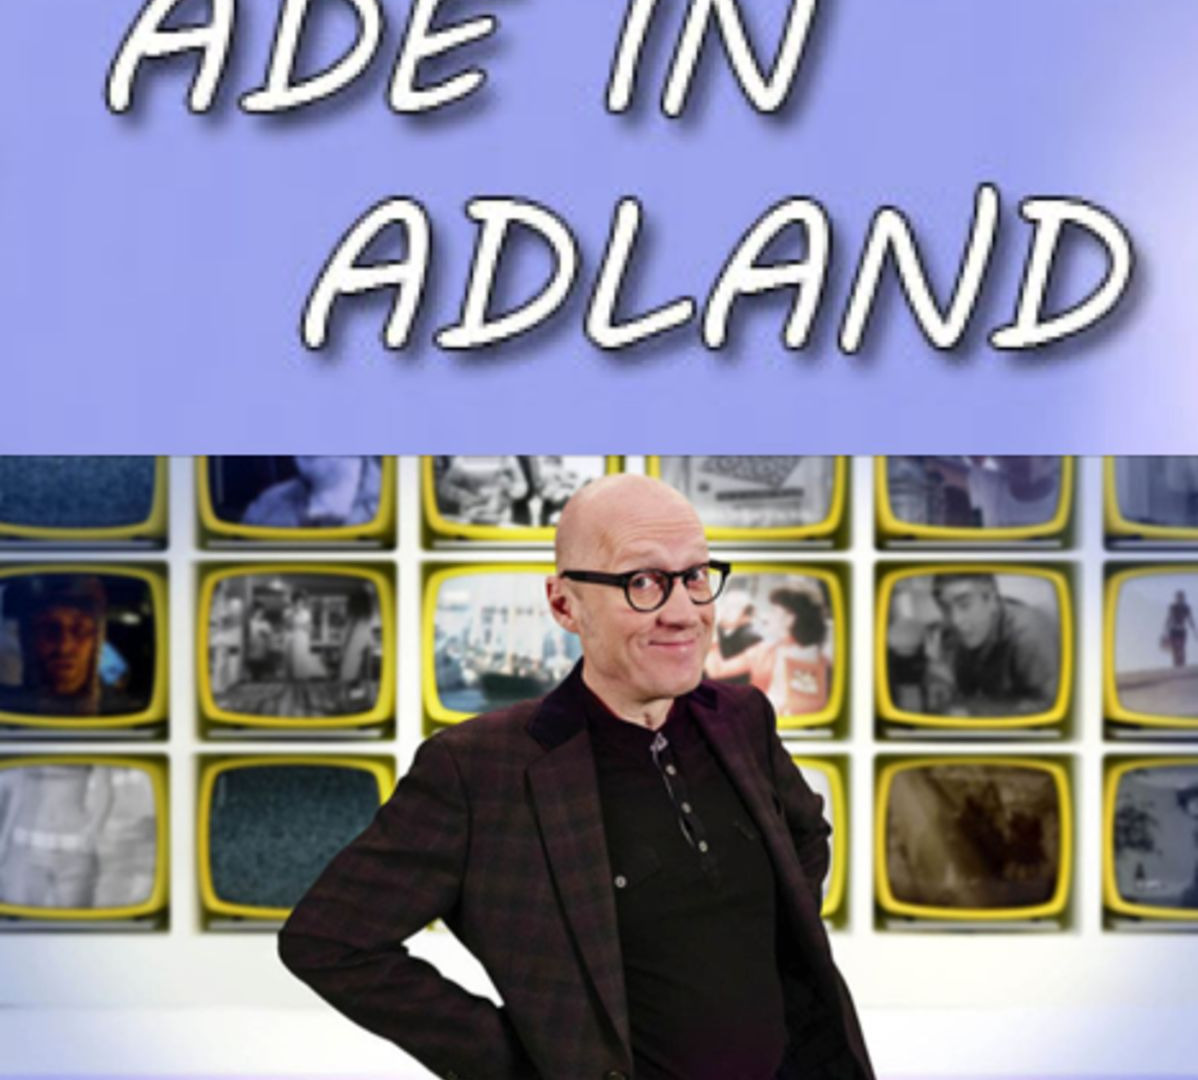 Show Ade in Adland